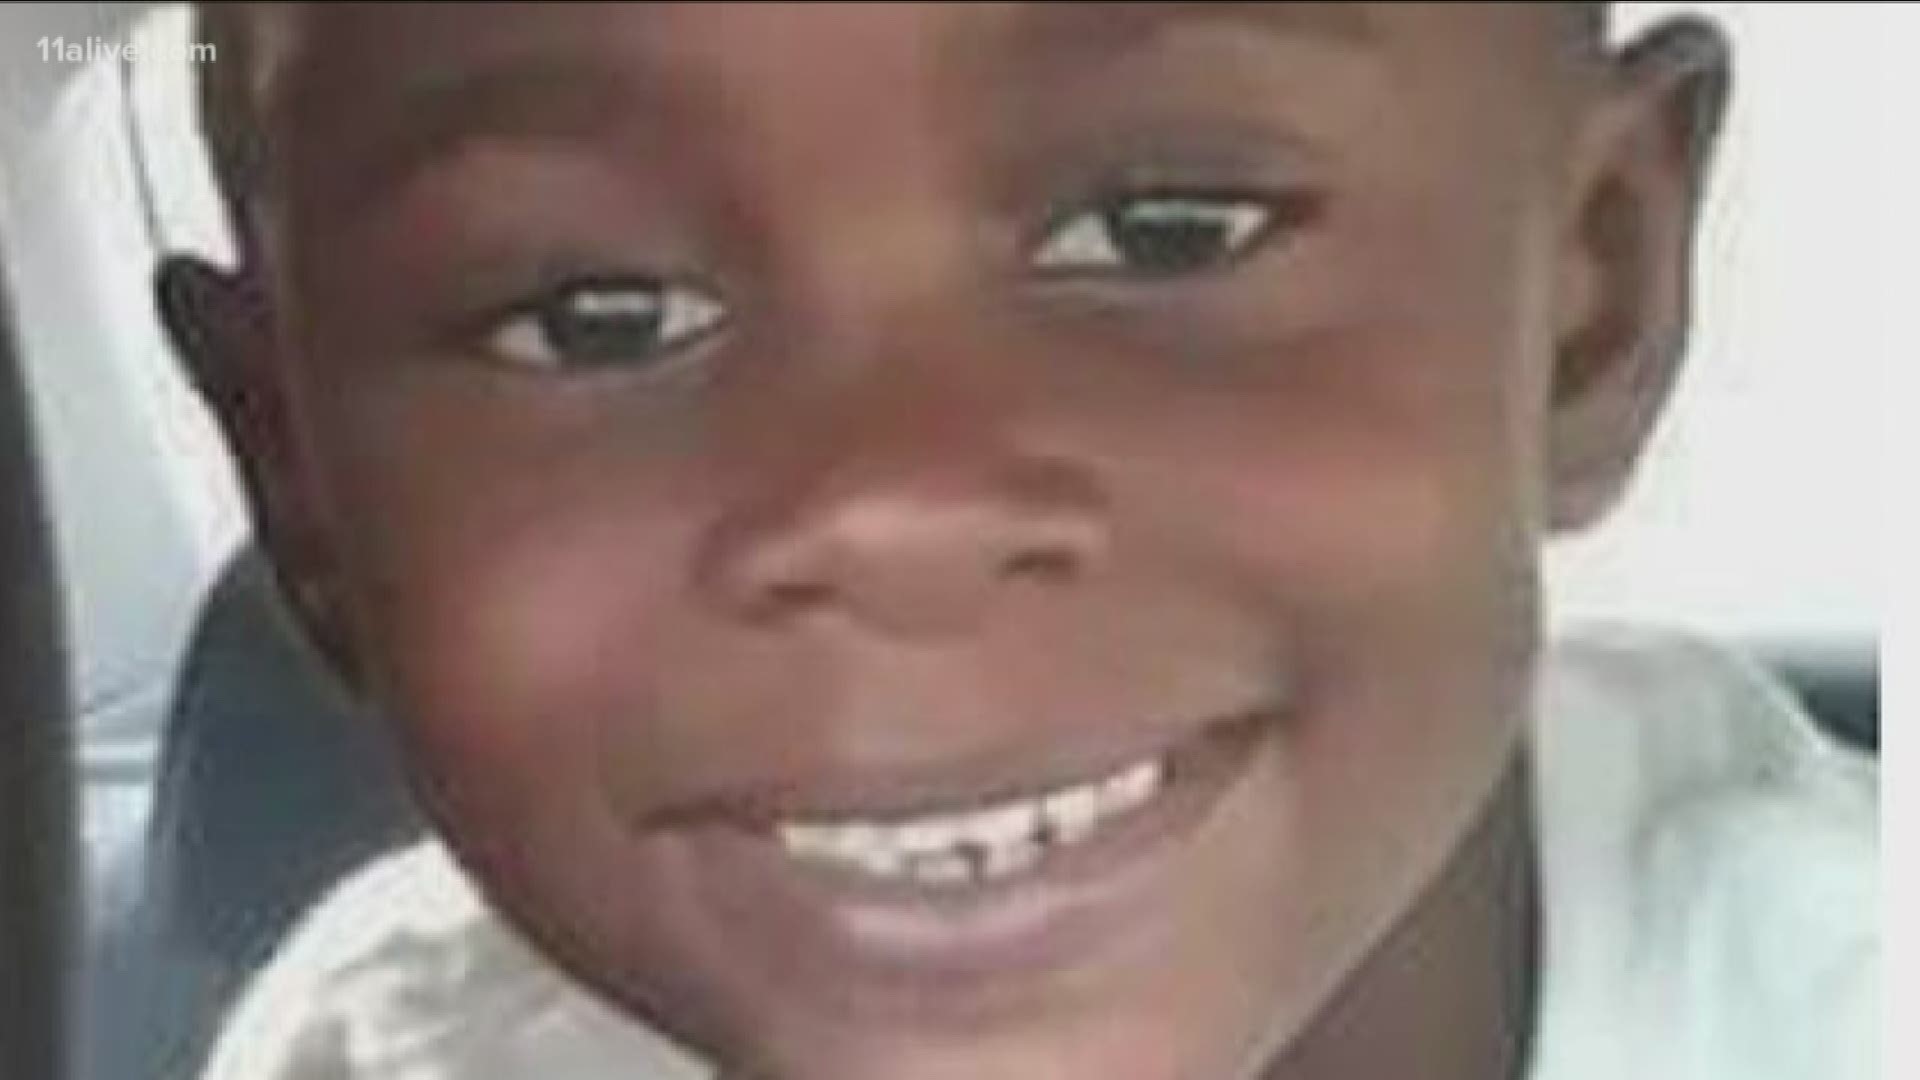 An 18-year-old DeKalb County man will spend the rest of his life behind bars for shooting and killing a six-year-old boy.